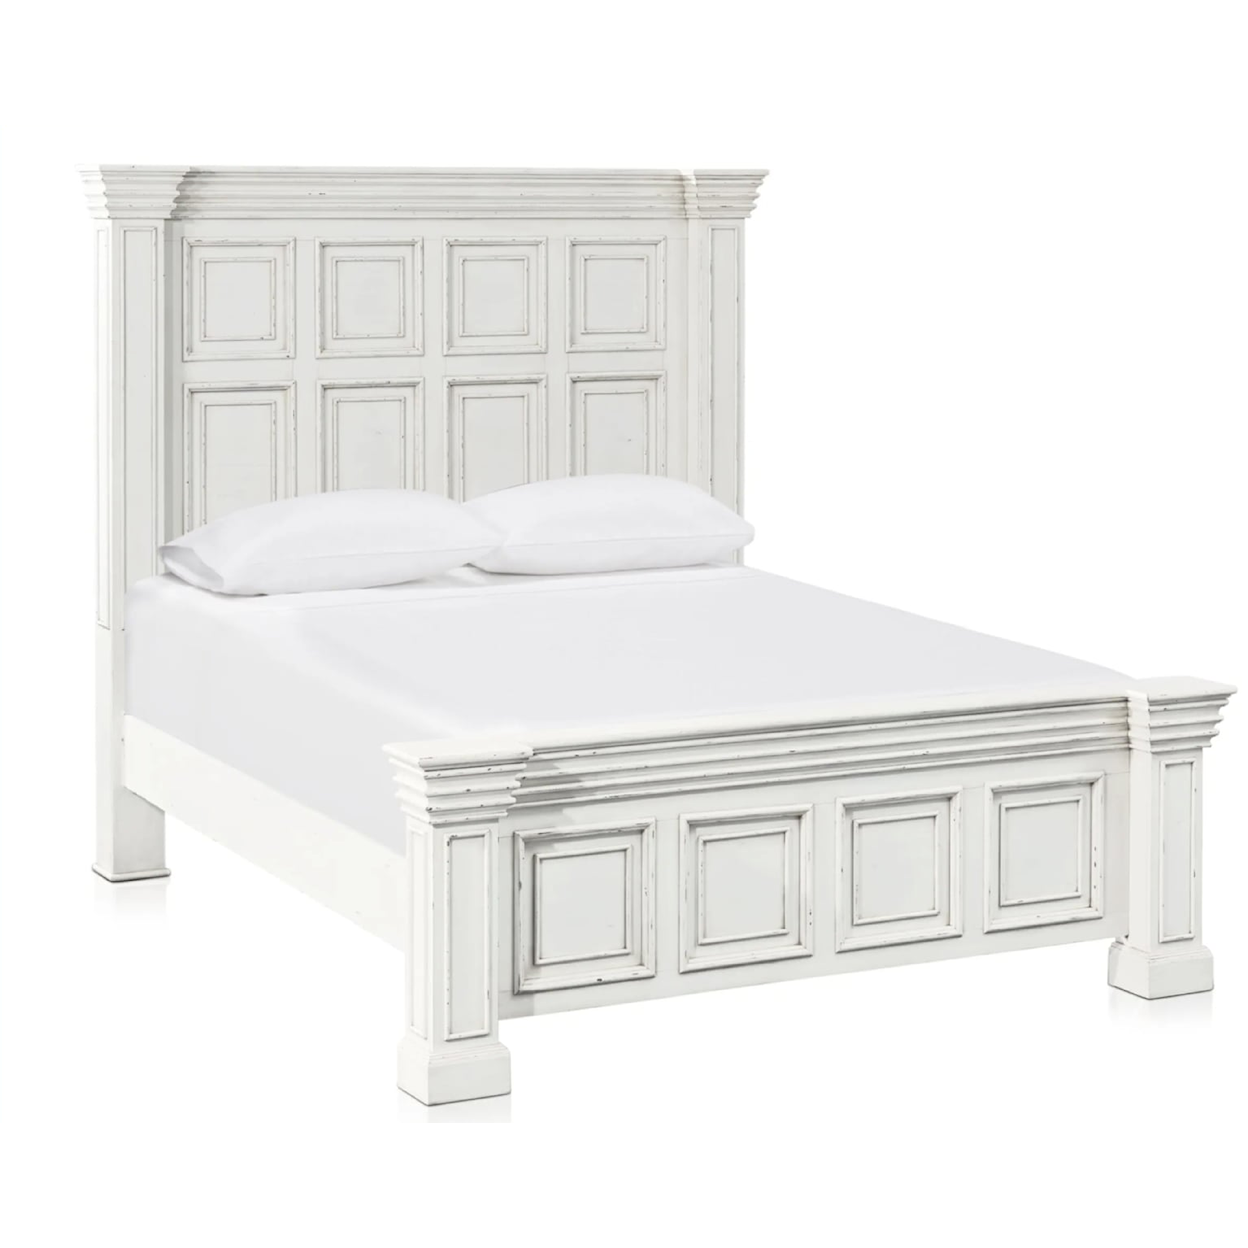 H317 6000 King Bed